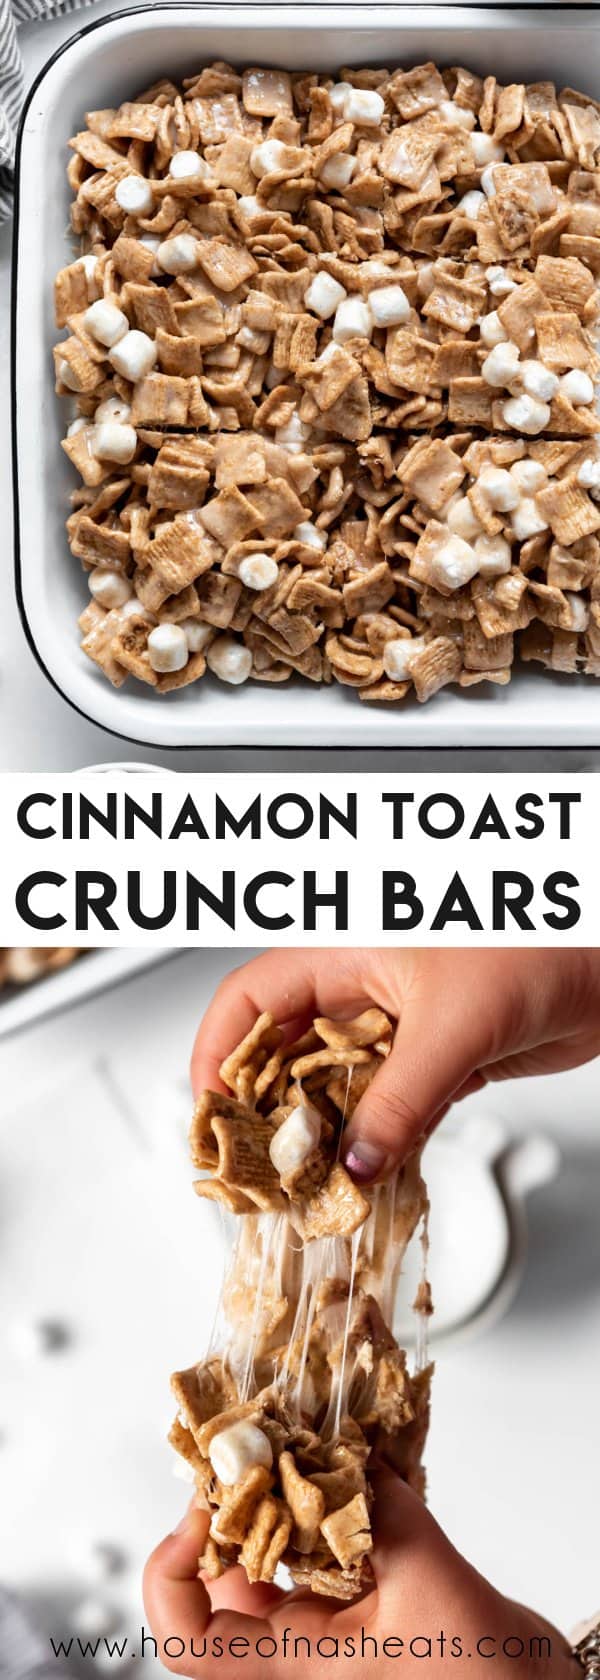 A collage of images of cinnamon toast crunch bars with text overlay.